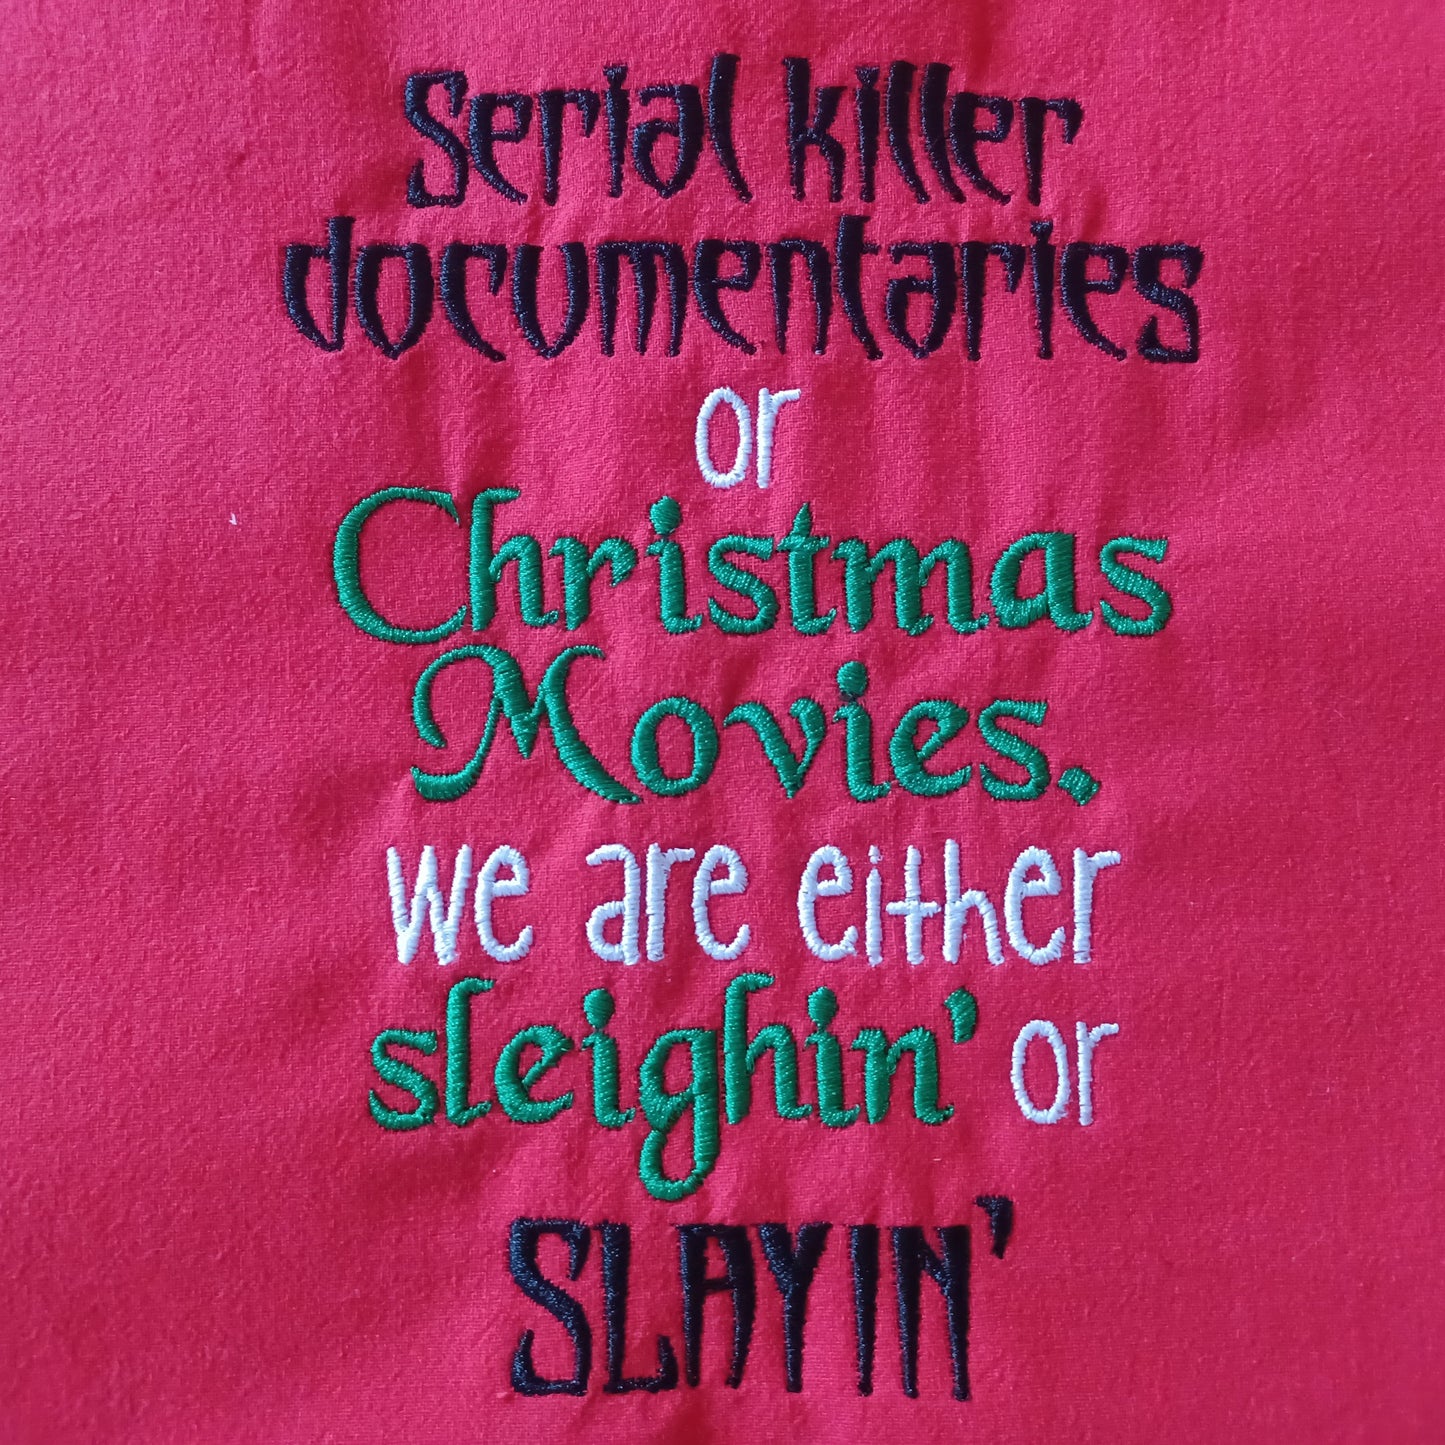 Serial Killer Documentaries or Christmas Movies. We Are Either Sleighin' or Slayin' (Embroidered CYO)